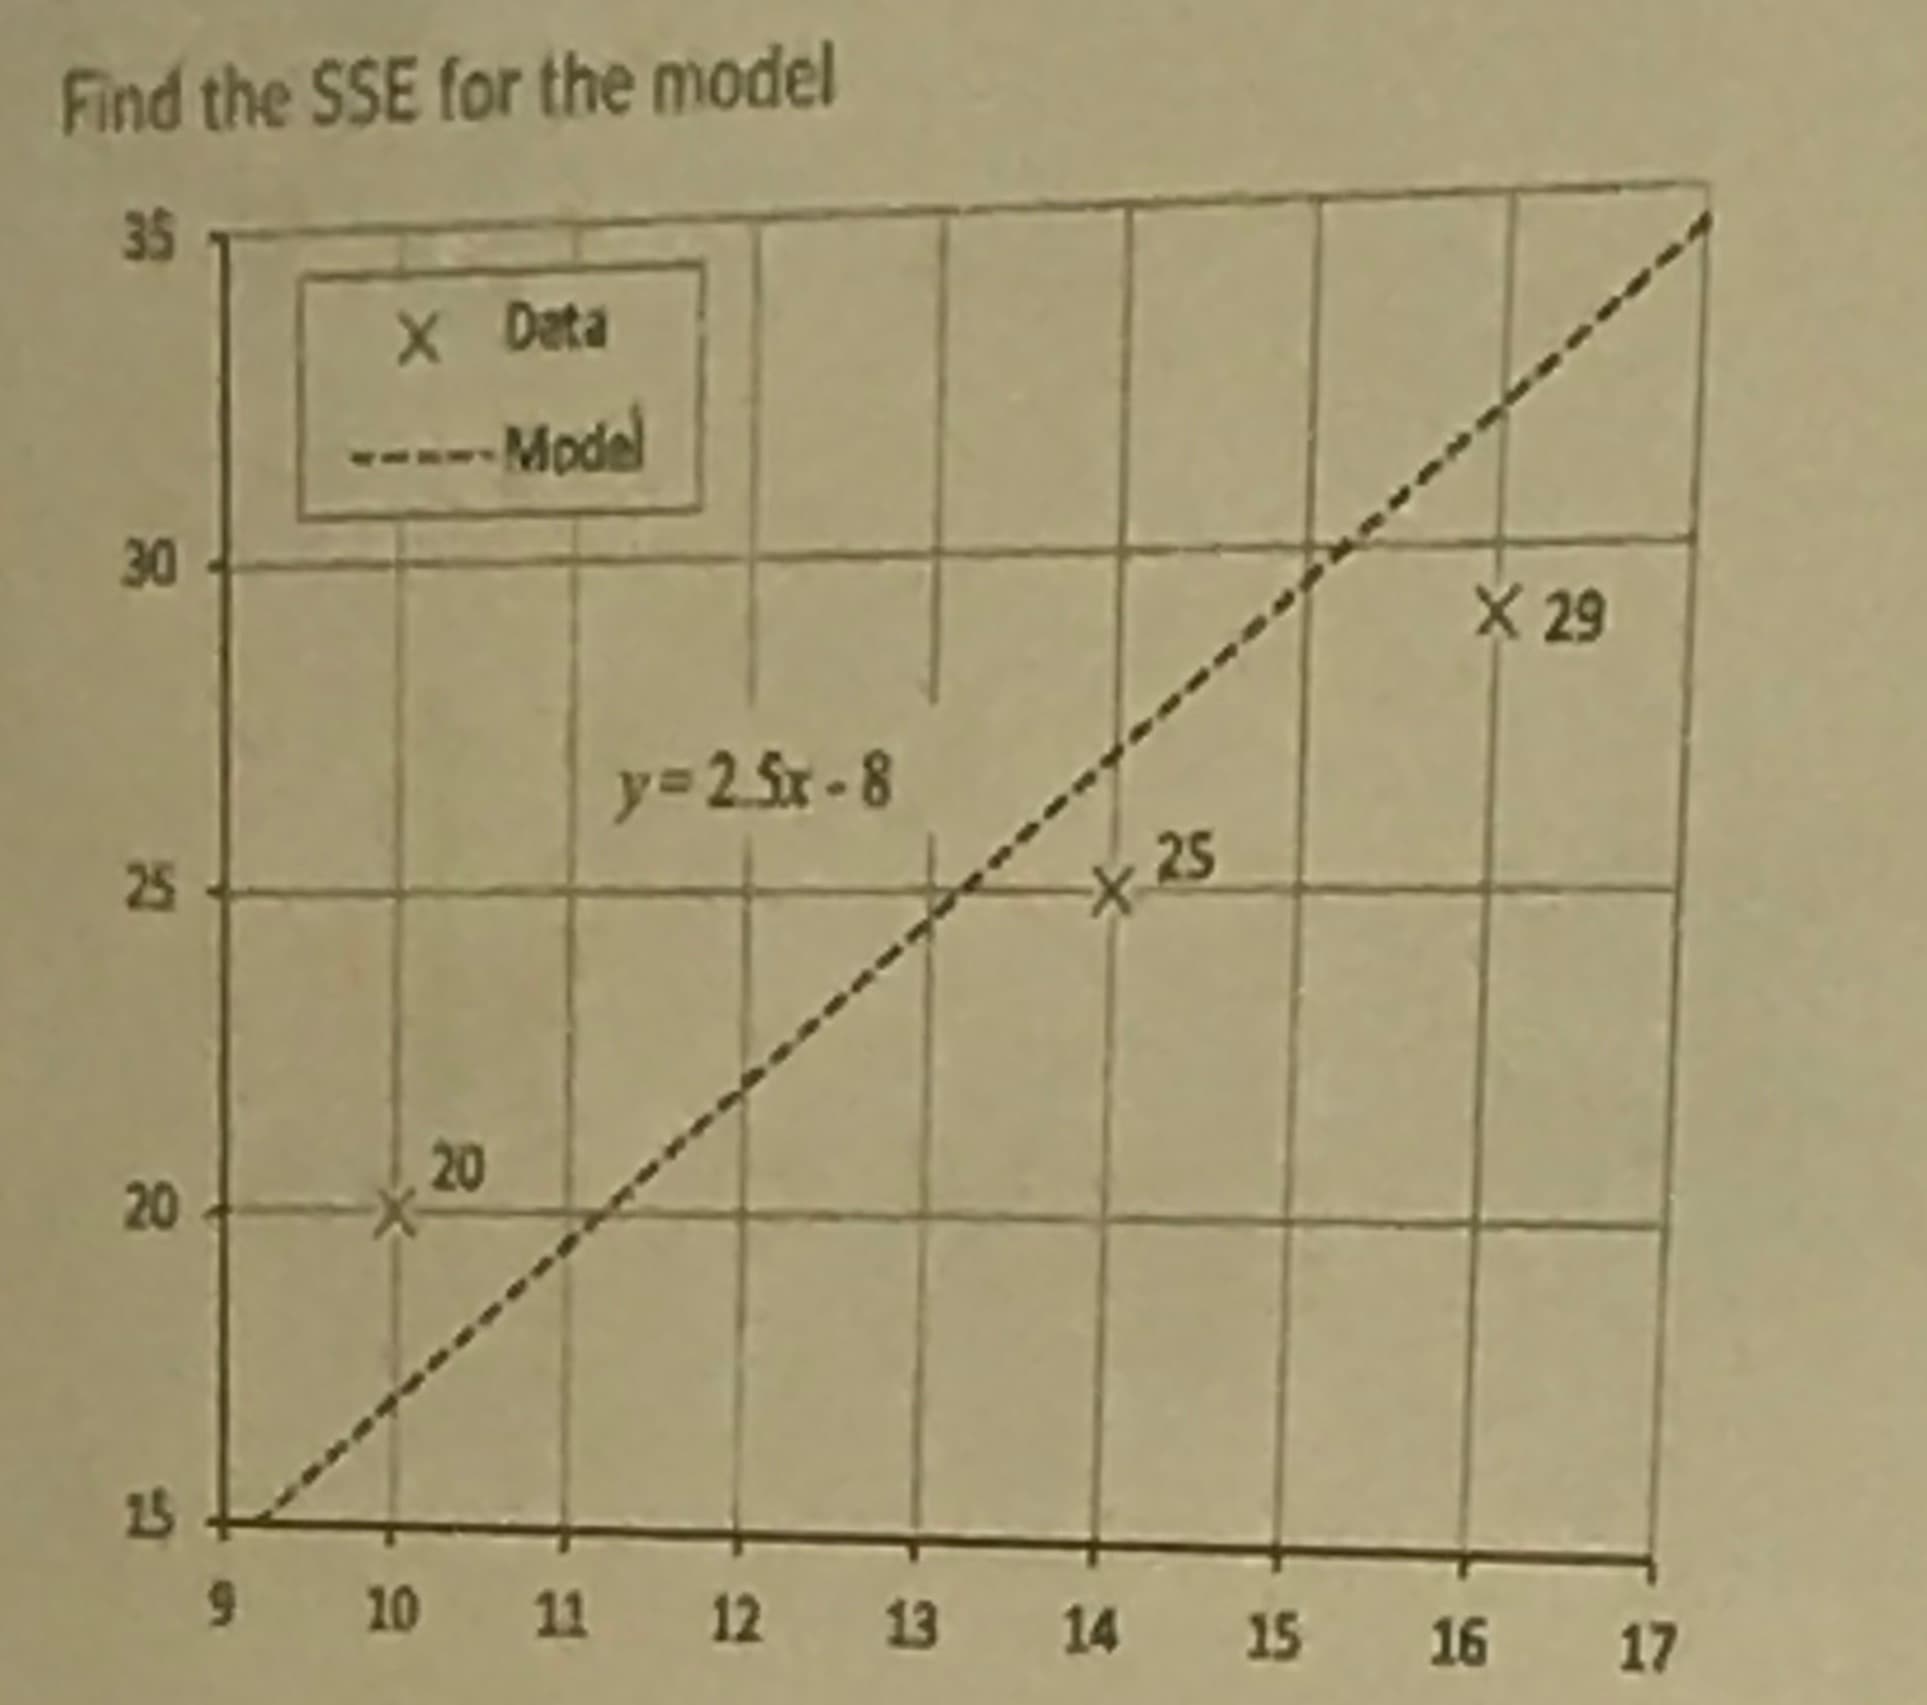 Find the SSE for the model
35
X Data
Model
30
X 29
y%=2.5x-8
25
25
20
15
10 11 12 13
14
15
16
17
20
